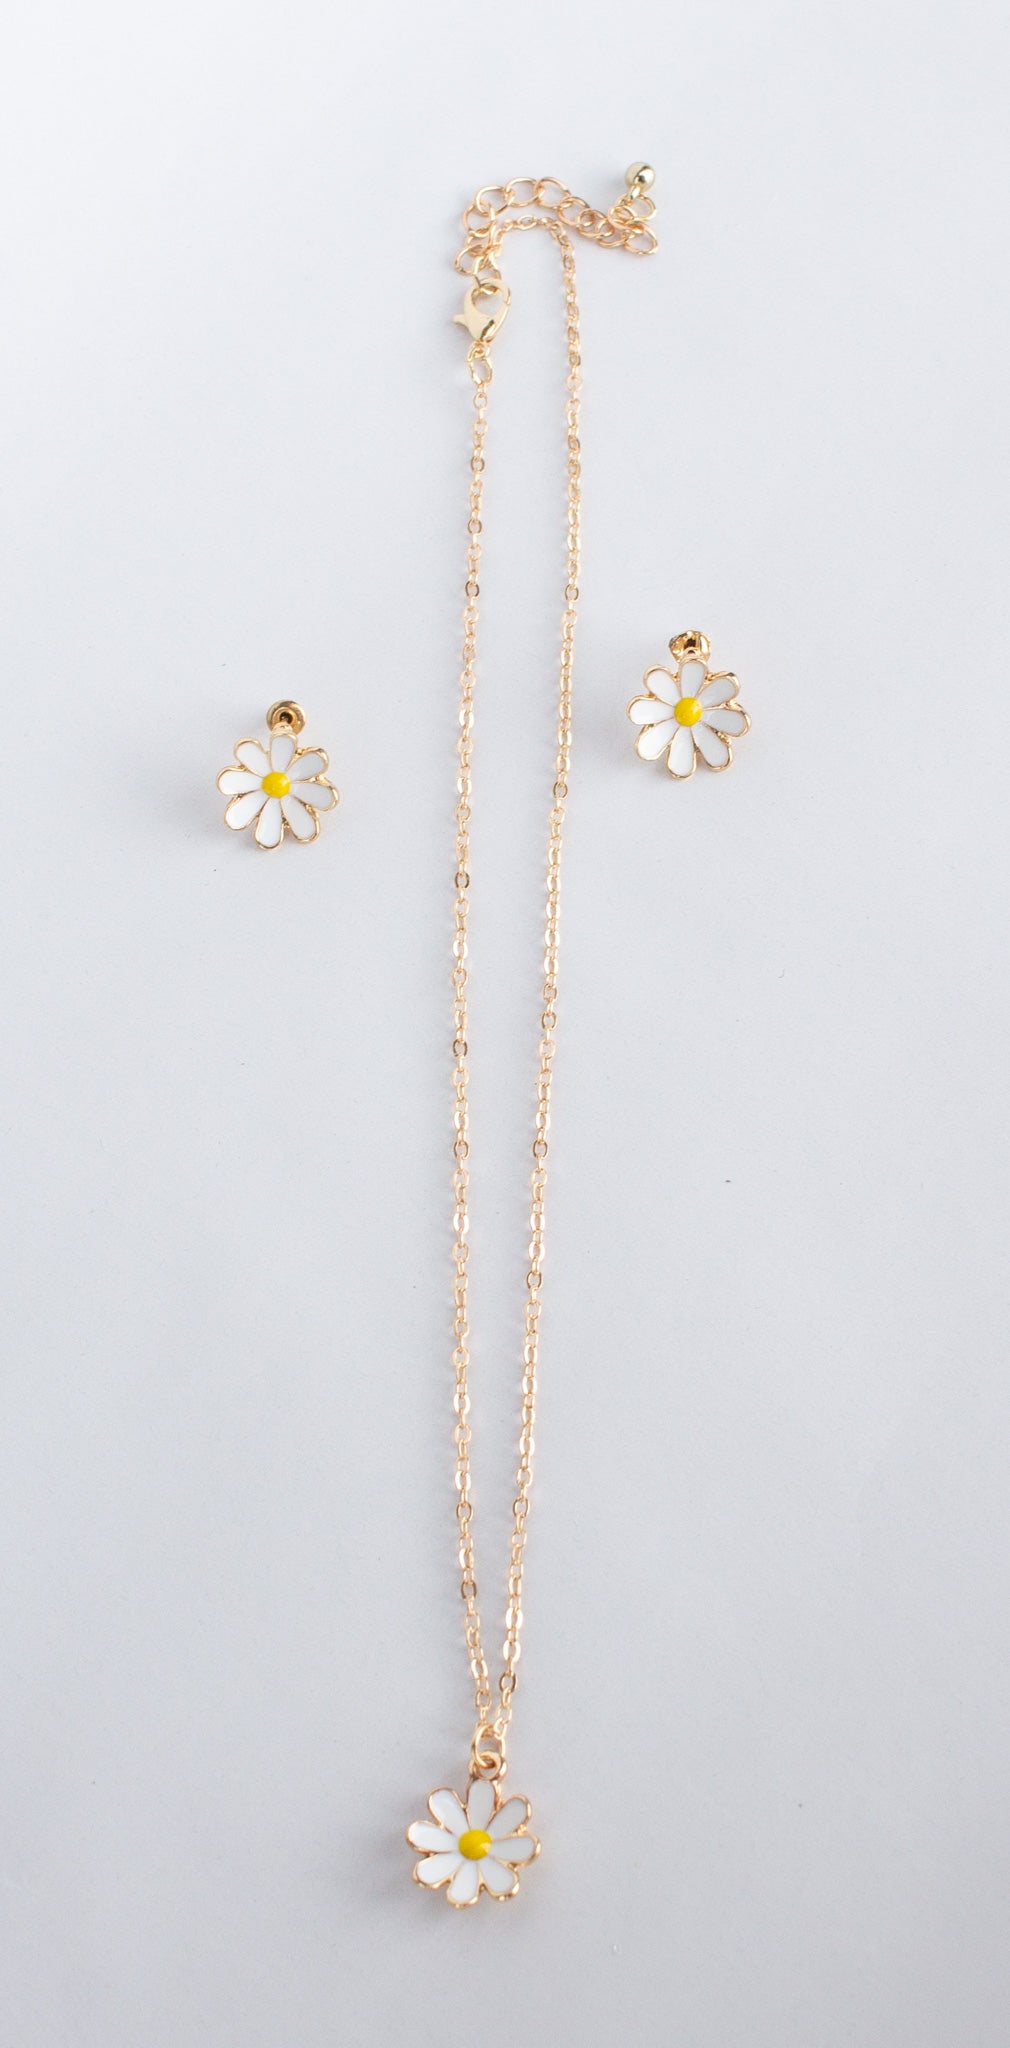 Daisy Charm Necklace and Stud Earring Set